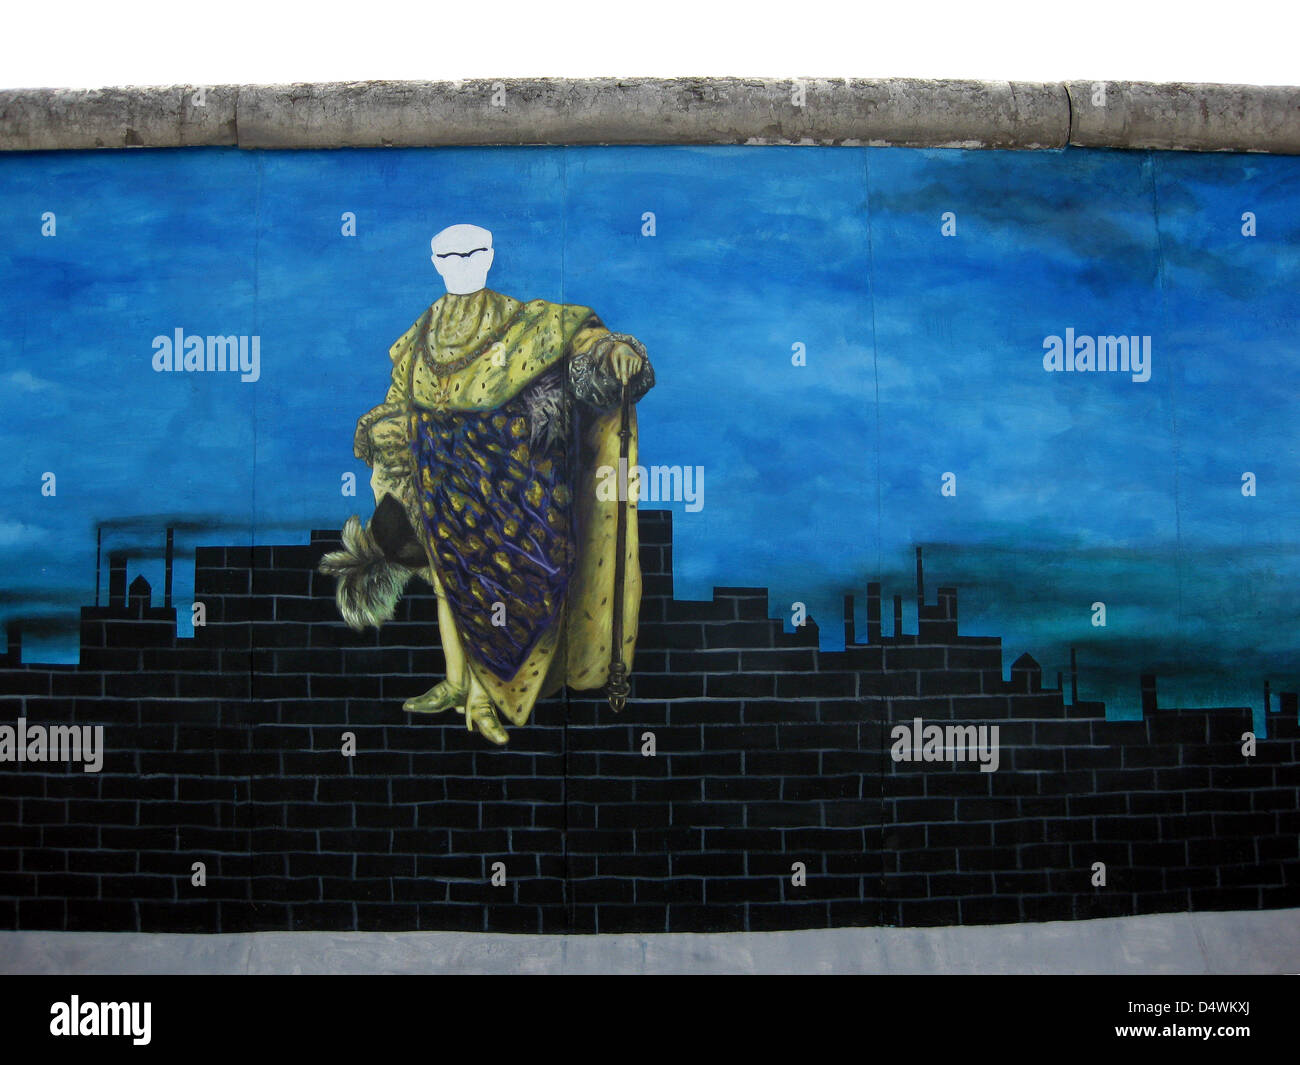 The artwork by Karsten Wenzel, 'Die Beständigkeit der Ignoranz' (The stability of ignorance), is pictured on a section of the Berlin Wall at the East Side Gallery on Mühlenstrasse in Berlin, Germany, in August 2009. The concrete parts of the Berlin Wall between Ostbahnhof and Warschauer Strasse were painted by international artists after the opening of the inner-German border in November 1989. Photo: Dieter Palm Stock Photo